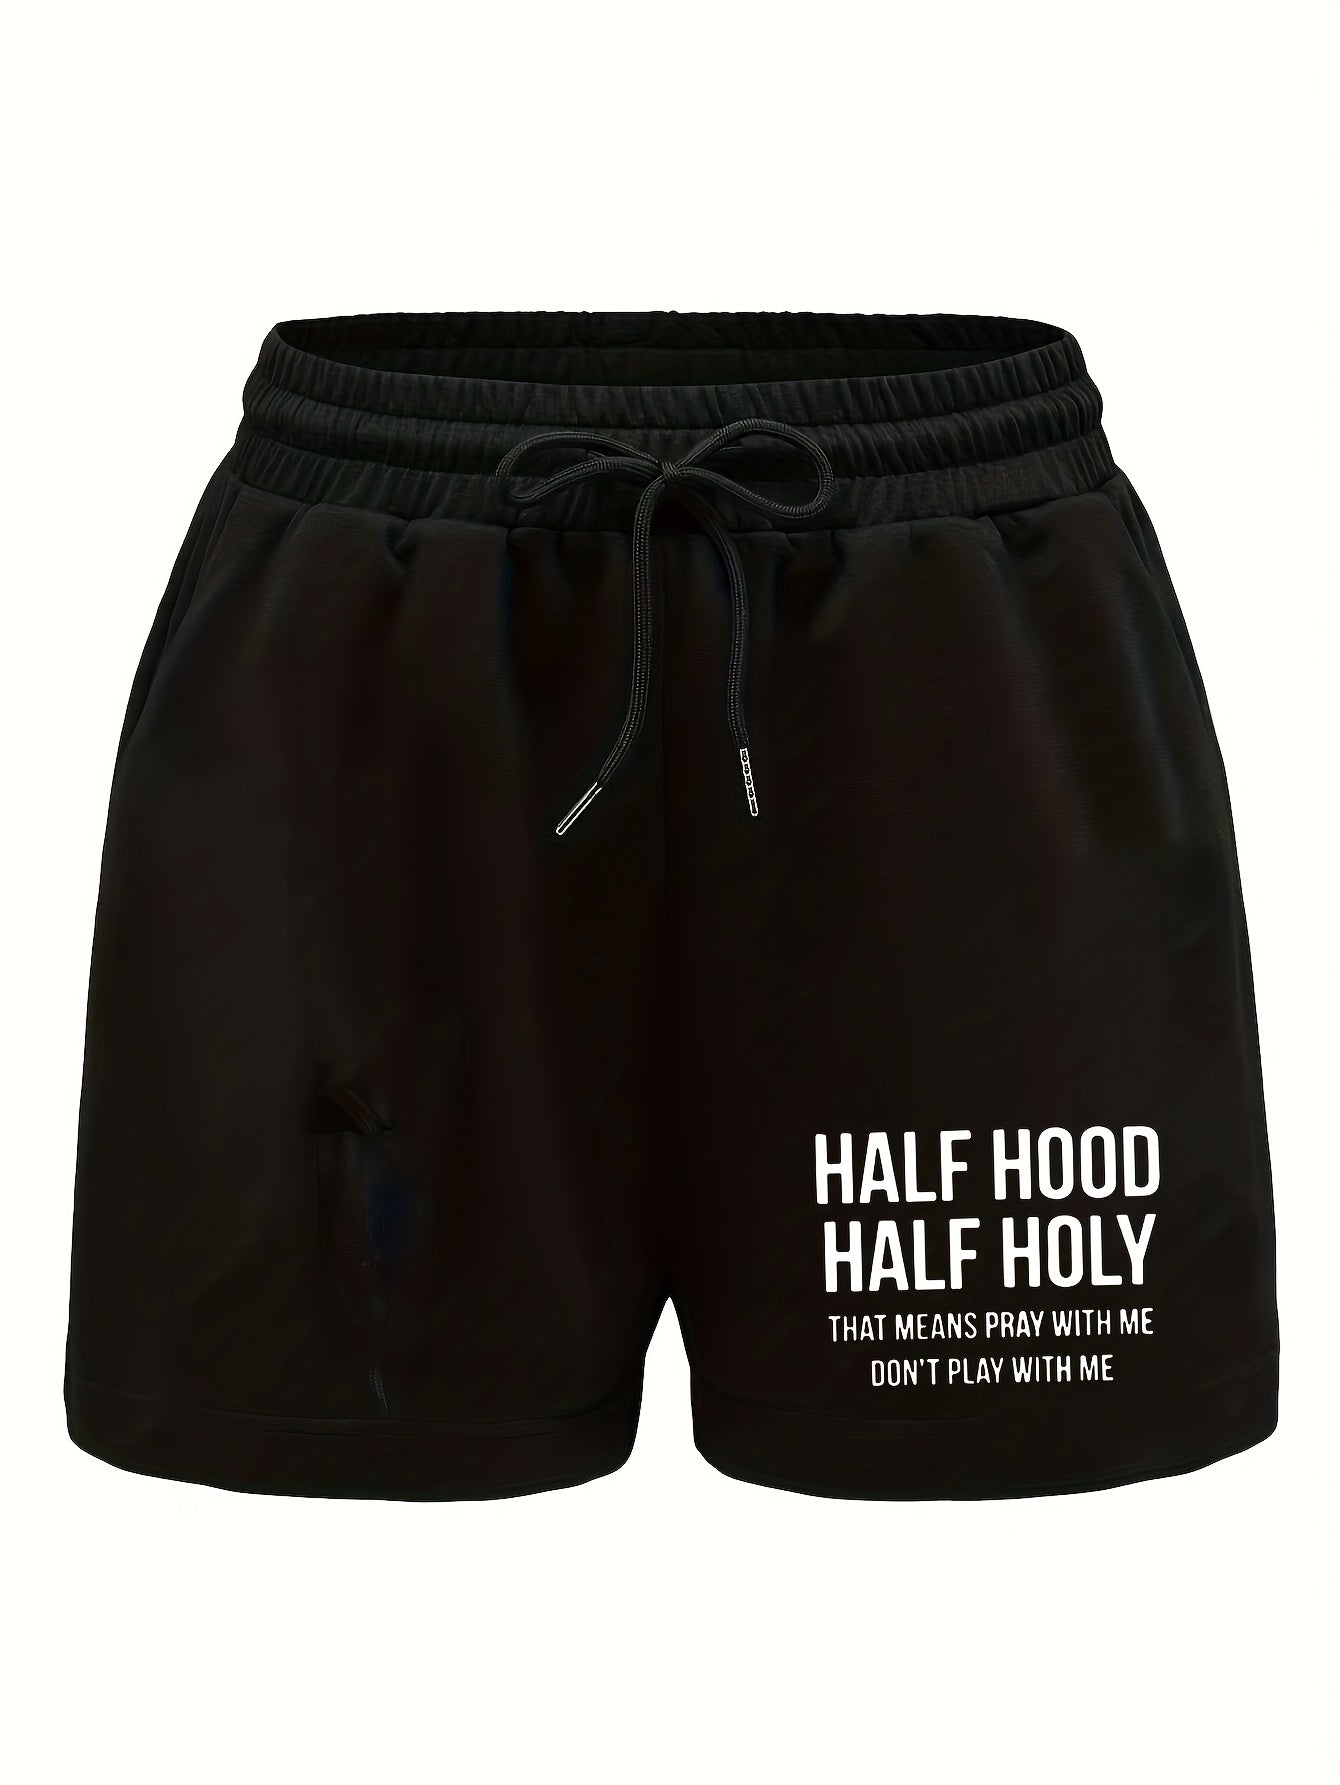 Half Hood Half Holy Pray With Me Don't Play With Me Women's Christian Shorts claimedbygoddesigns